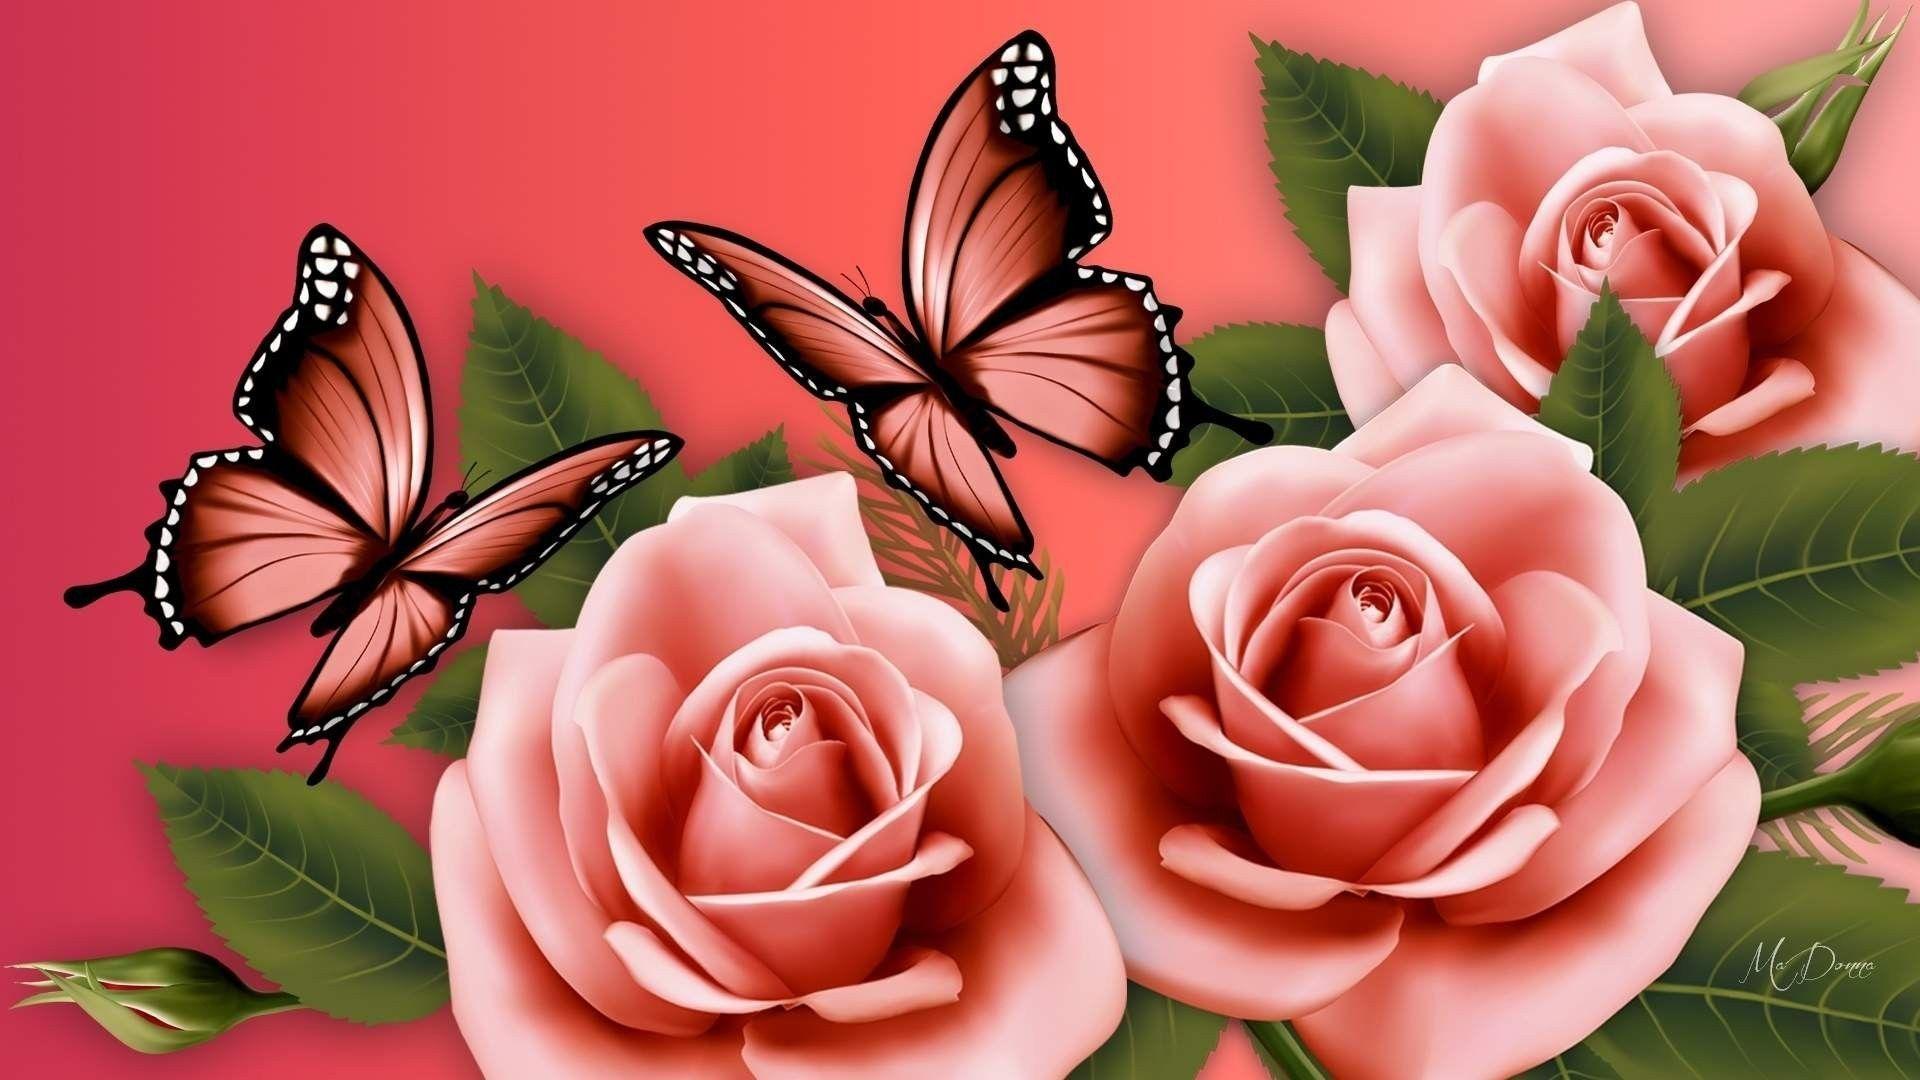 Rose and Butterfly Wallpapers - Top Free Rose and Butterfly Backgrounds